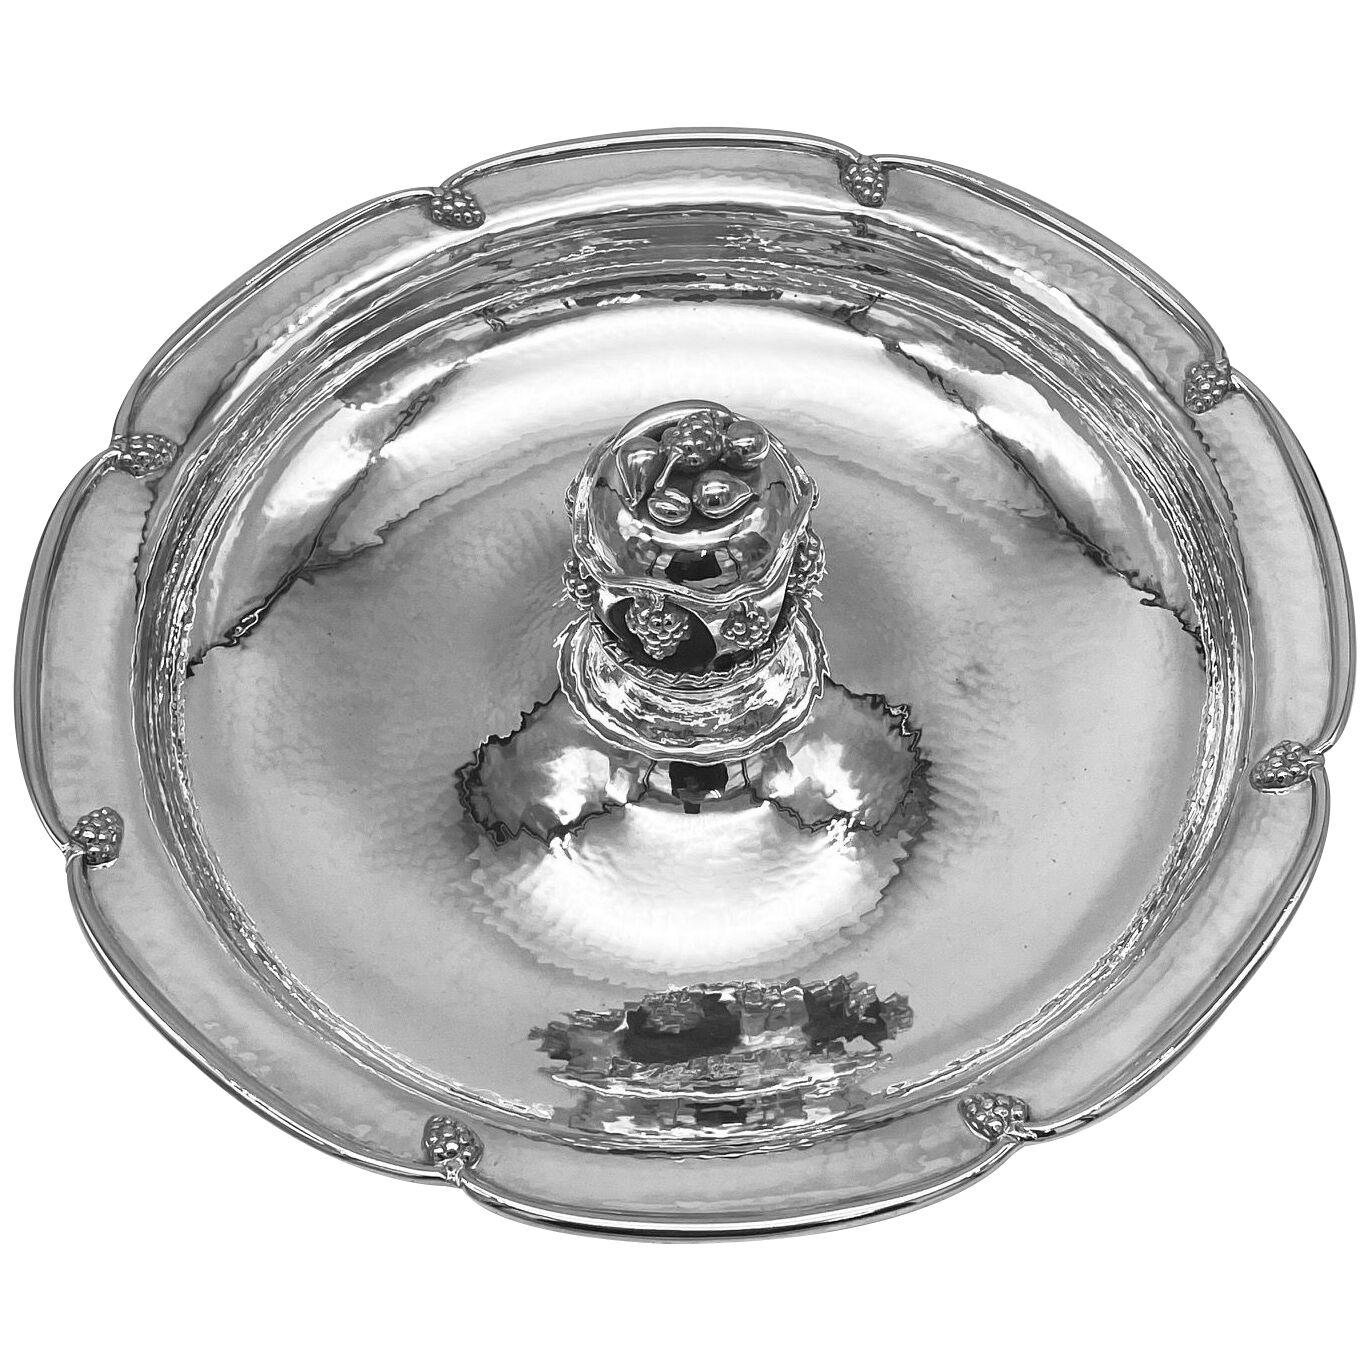 Pair of Silver Dishes